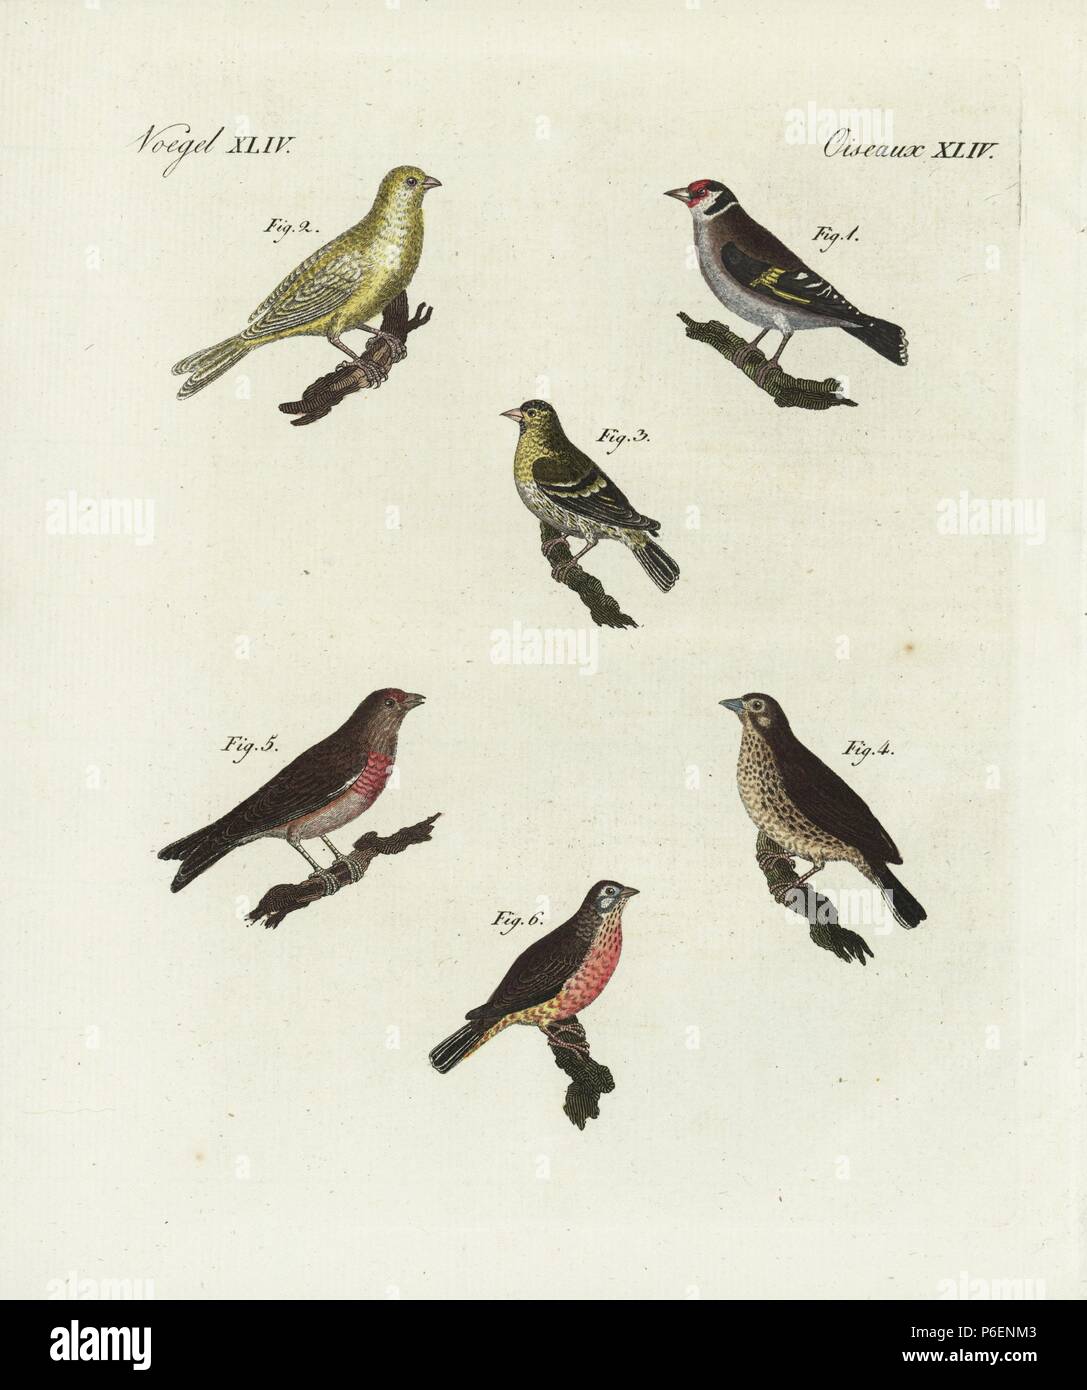 Goldfinch, Carduelis carduelis 1, blue chaffinch, Fringilla teydea 2, siskin, Carduelis spinus 3, linnet, Carduelis cannabina 4,5, and redpoll, Carduelis flammea 6. Handcoloured copperplate engraving from Bertuch's 'Bilderbuch fur Kinder' (Picture Book for Children), Weimar, 1798. Friedrich Johann Bertuch (1747-1822) was a German publisher and man of arts most famous for his 12-volume encyclopedia for children illustrated with 1,200 engraved plates on natural history, science, costume, mythology, etc., published from 1790-1830. Stock Photo